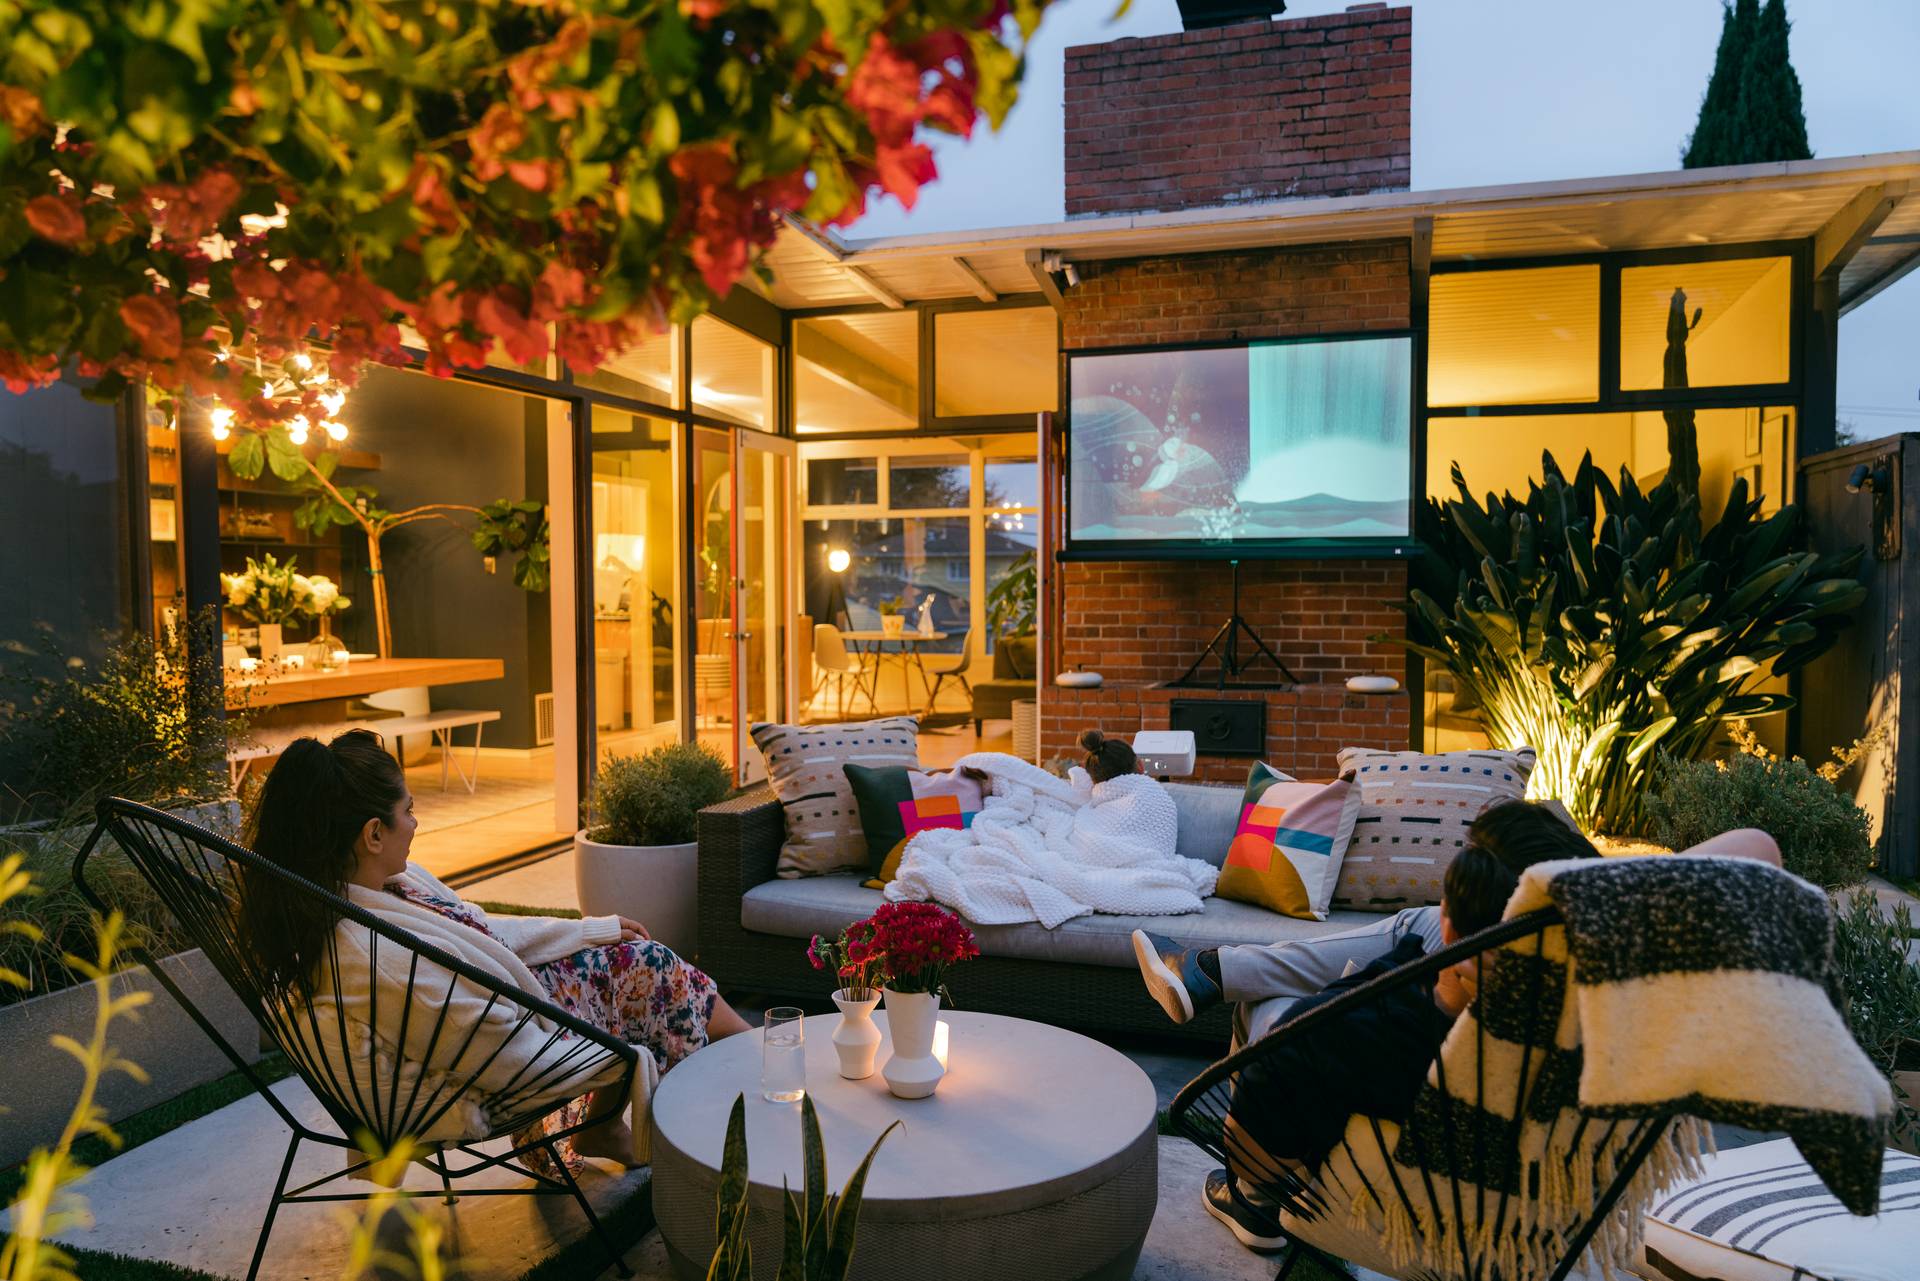 Courtyard movie night with family watching outdoor screen